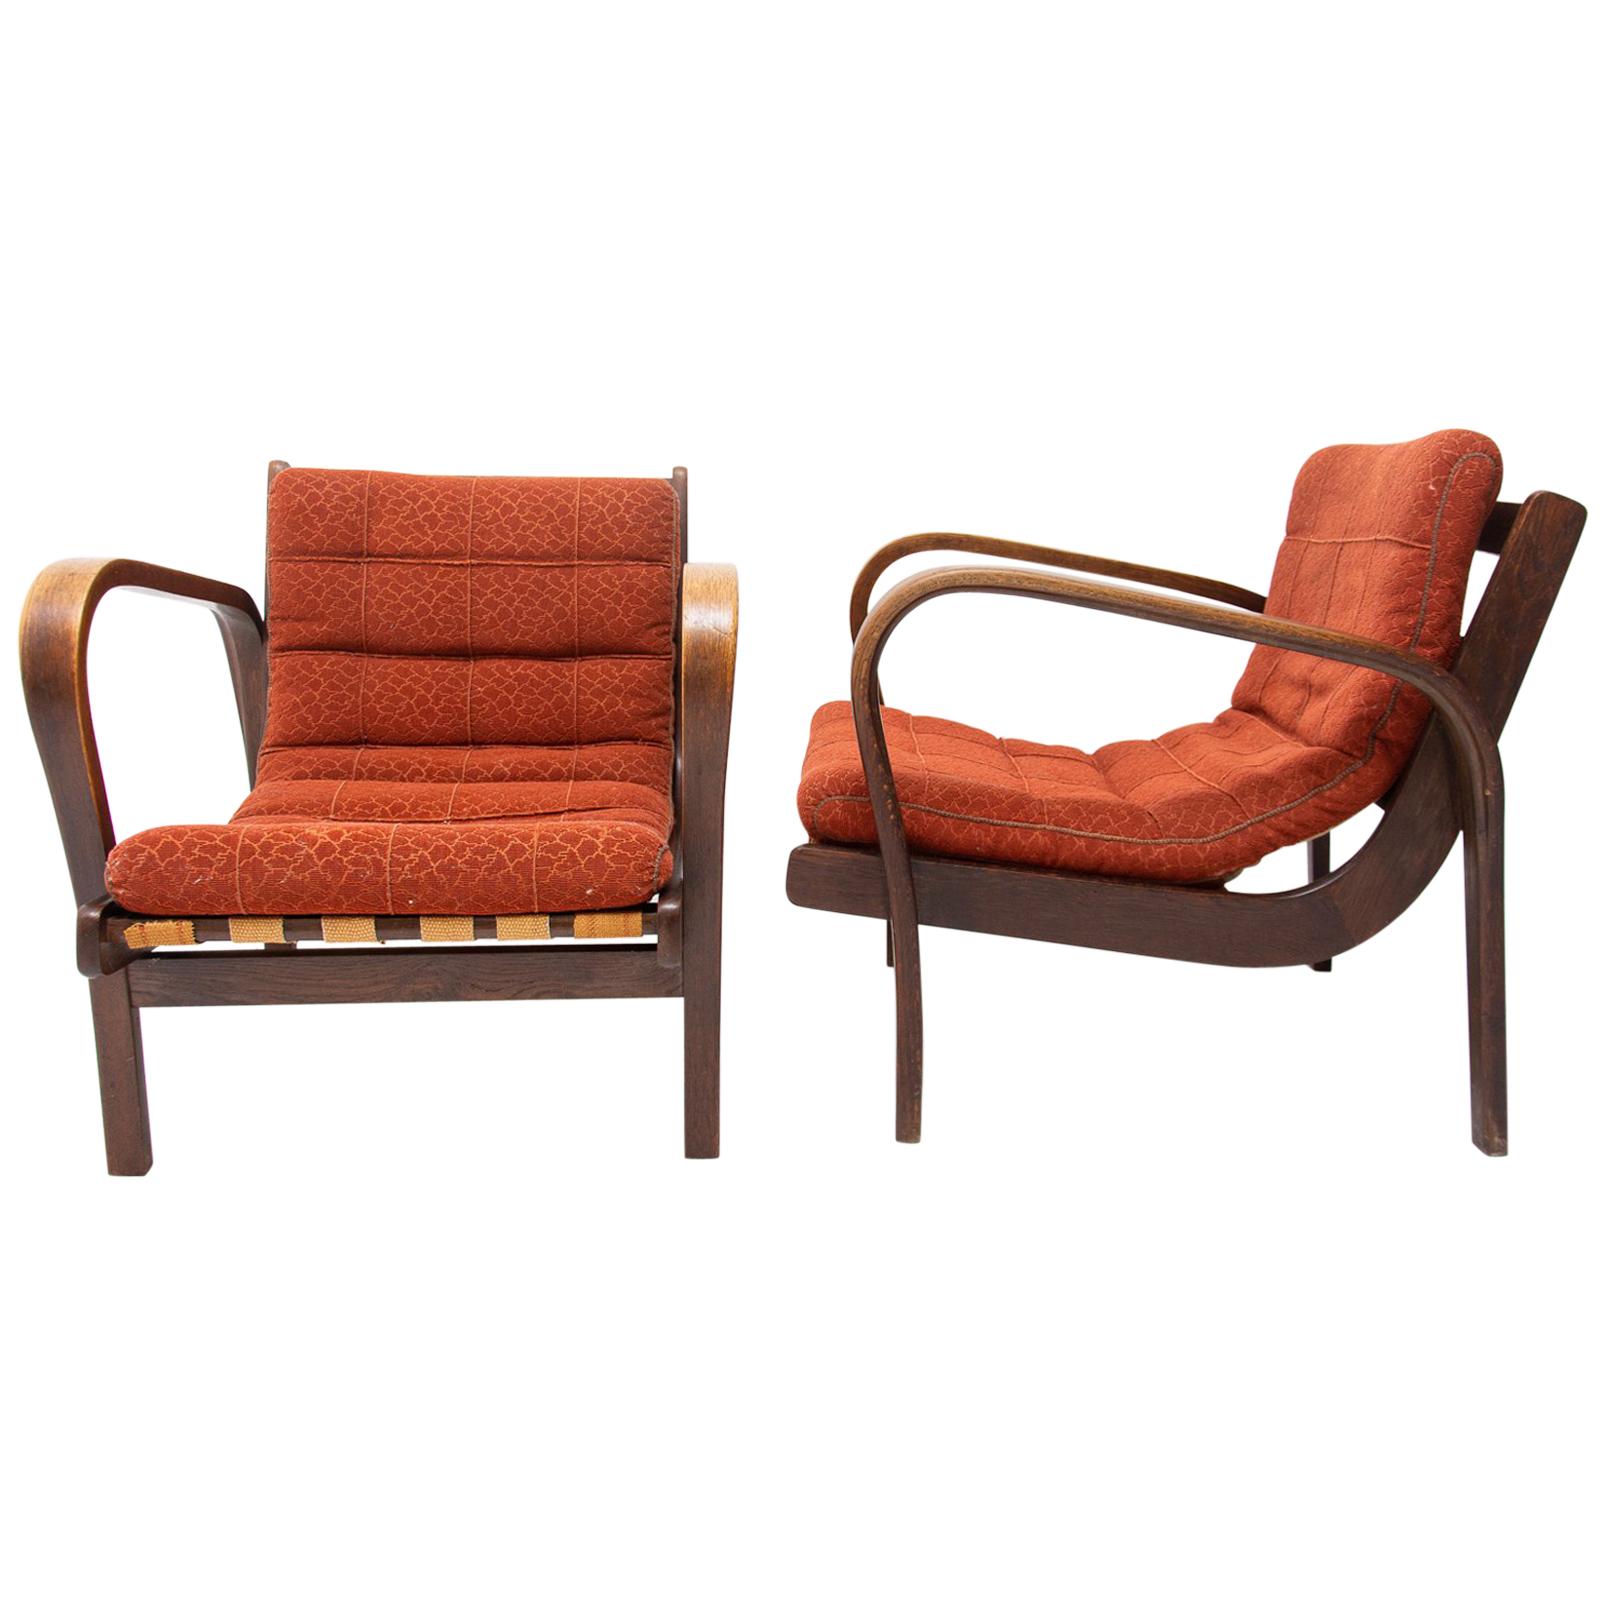 Midcentury Armchairs by Kropacek and Kozelka for Interier Praha 1944, Set of Two